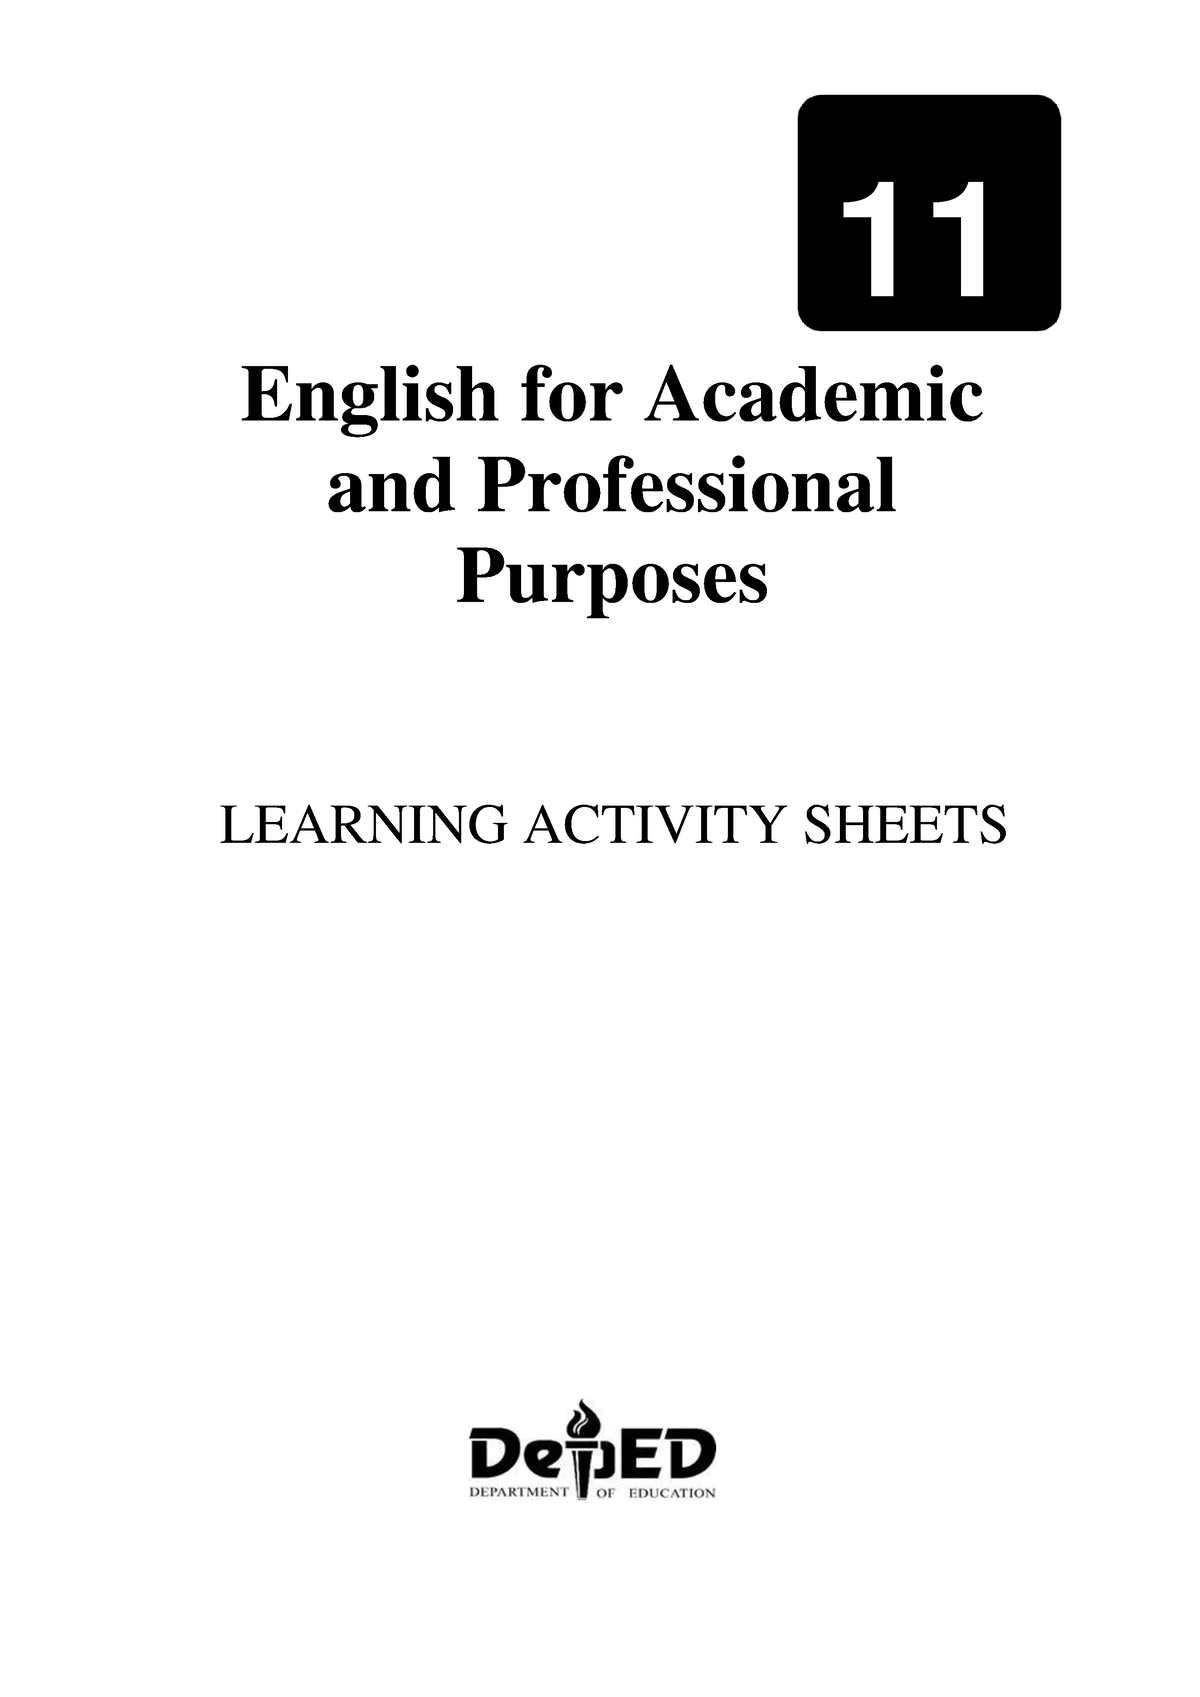 Eapp Q2 Las Eapp Q2 Las 11 English For Academic And Professional Purposes Learning Activity 7073